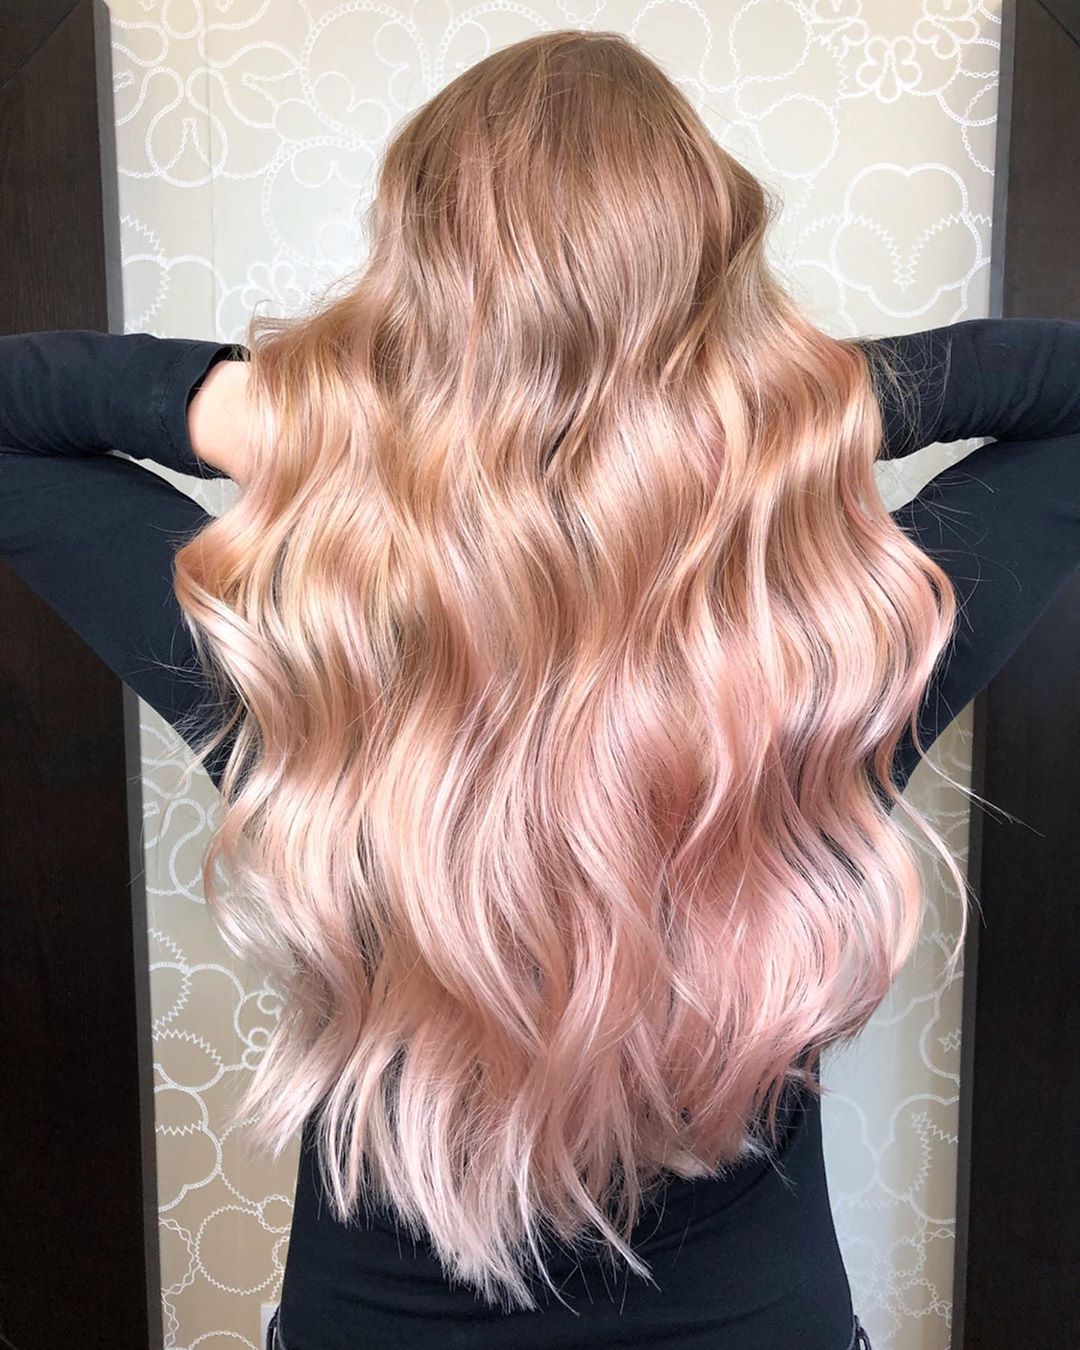 15 Beautiful Strawberry Hair Colours and Ideas - Colourwarehouse